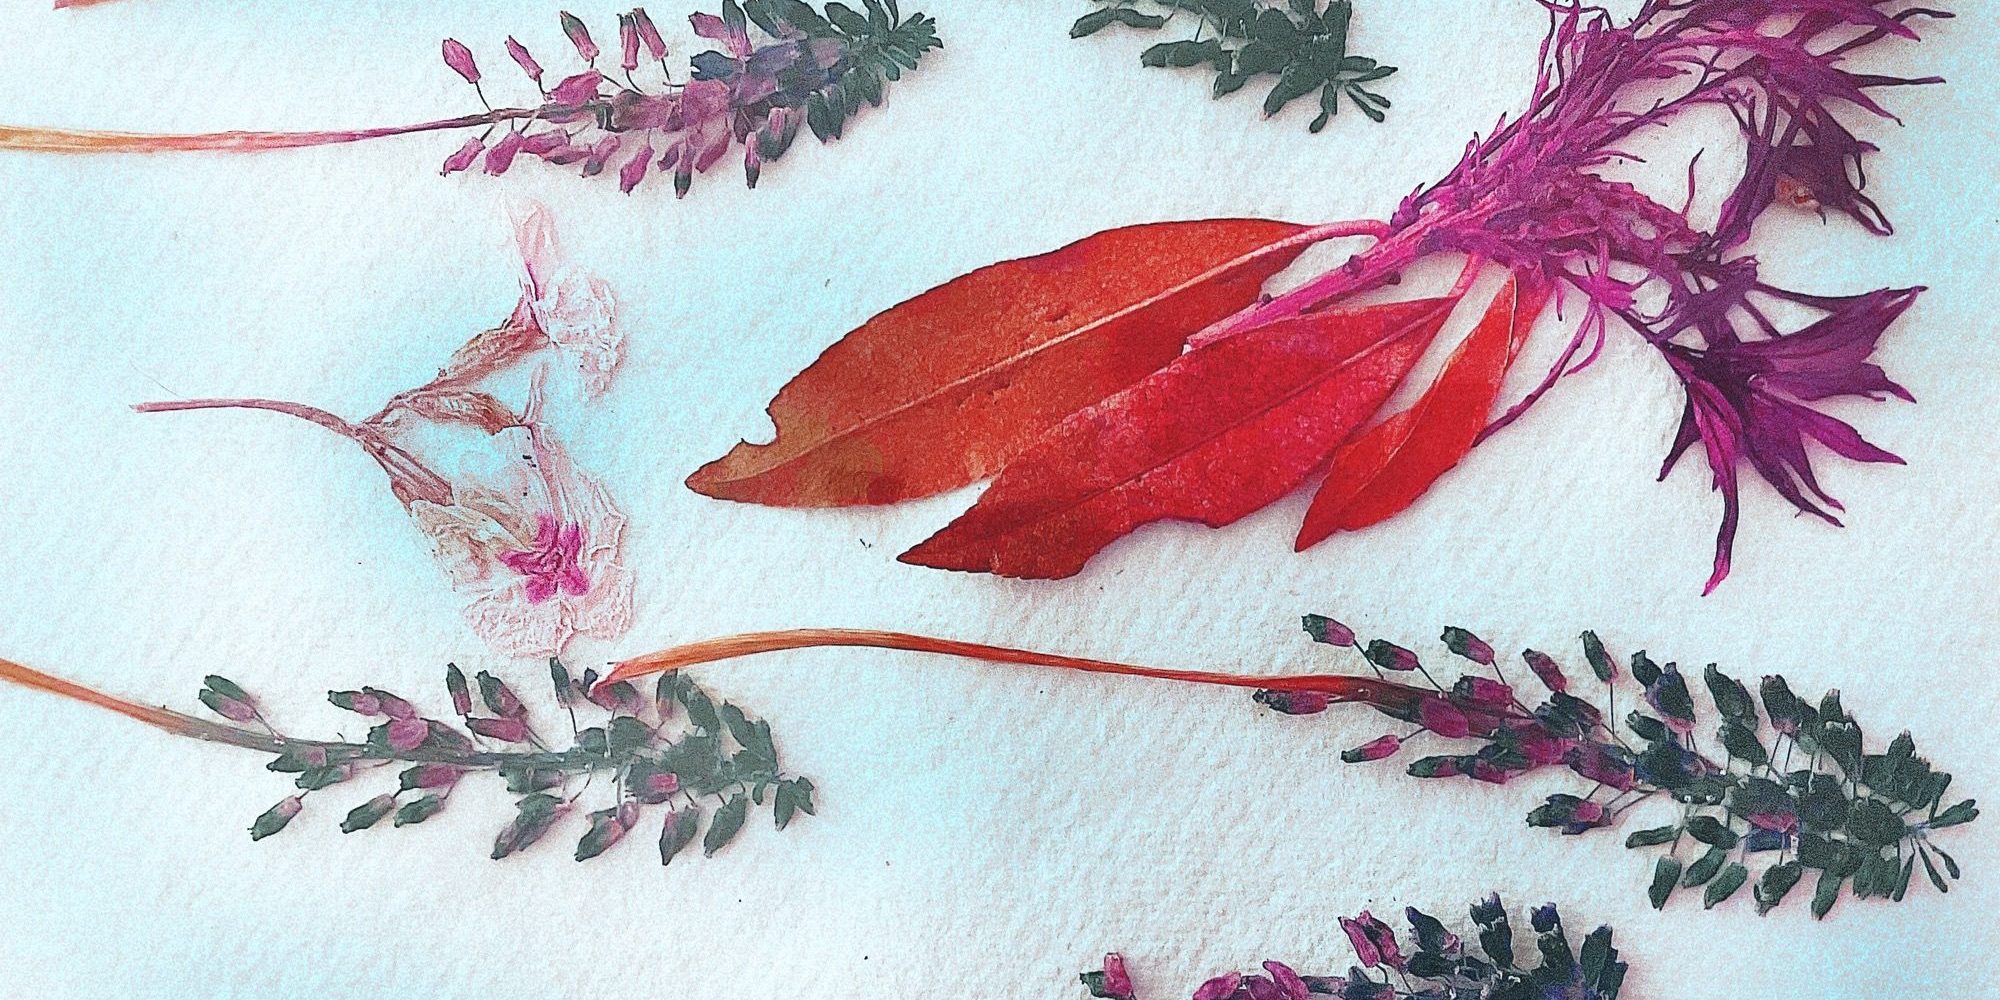 An array of pressed flowers and leaves with rich colours artistically arranged on a textured paper background.